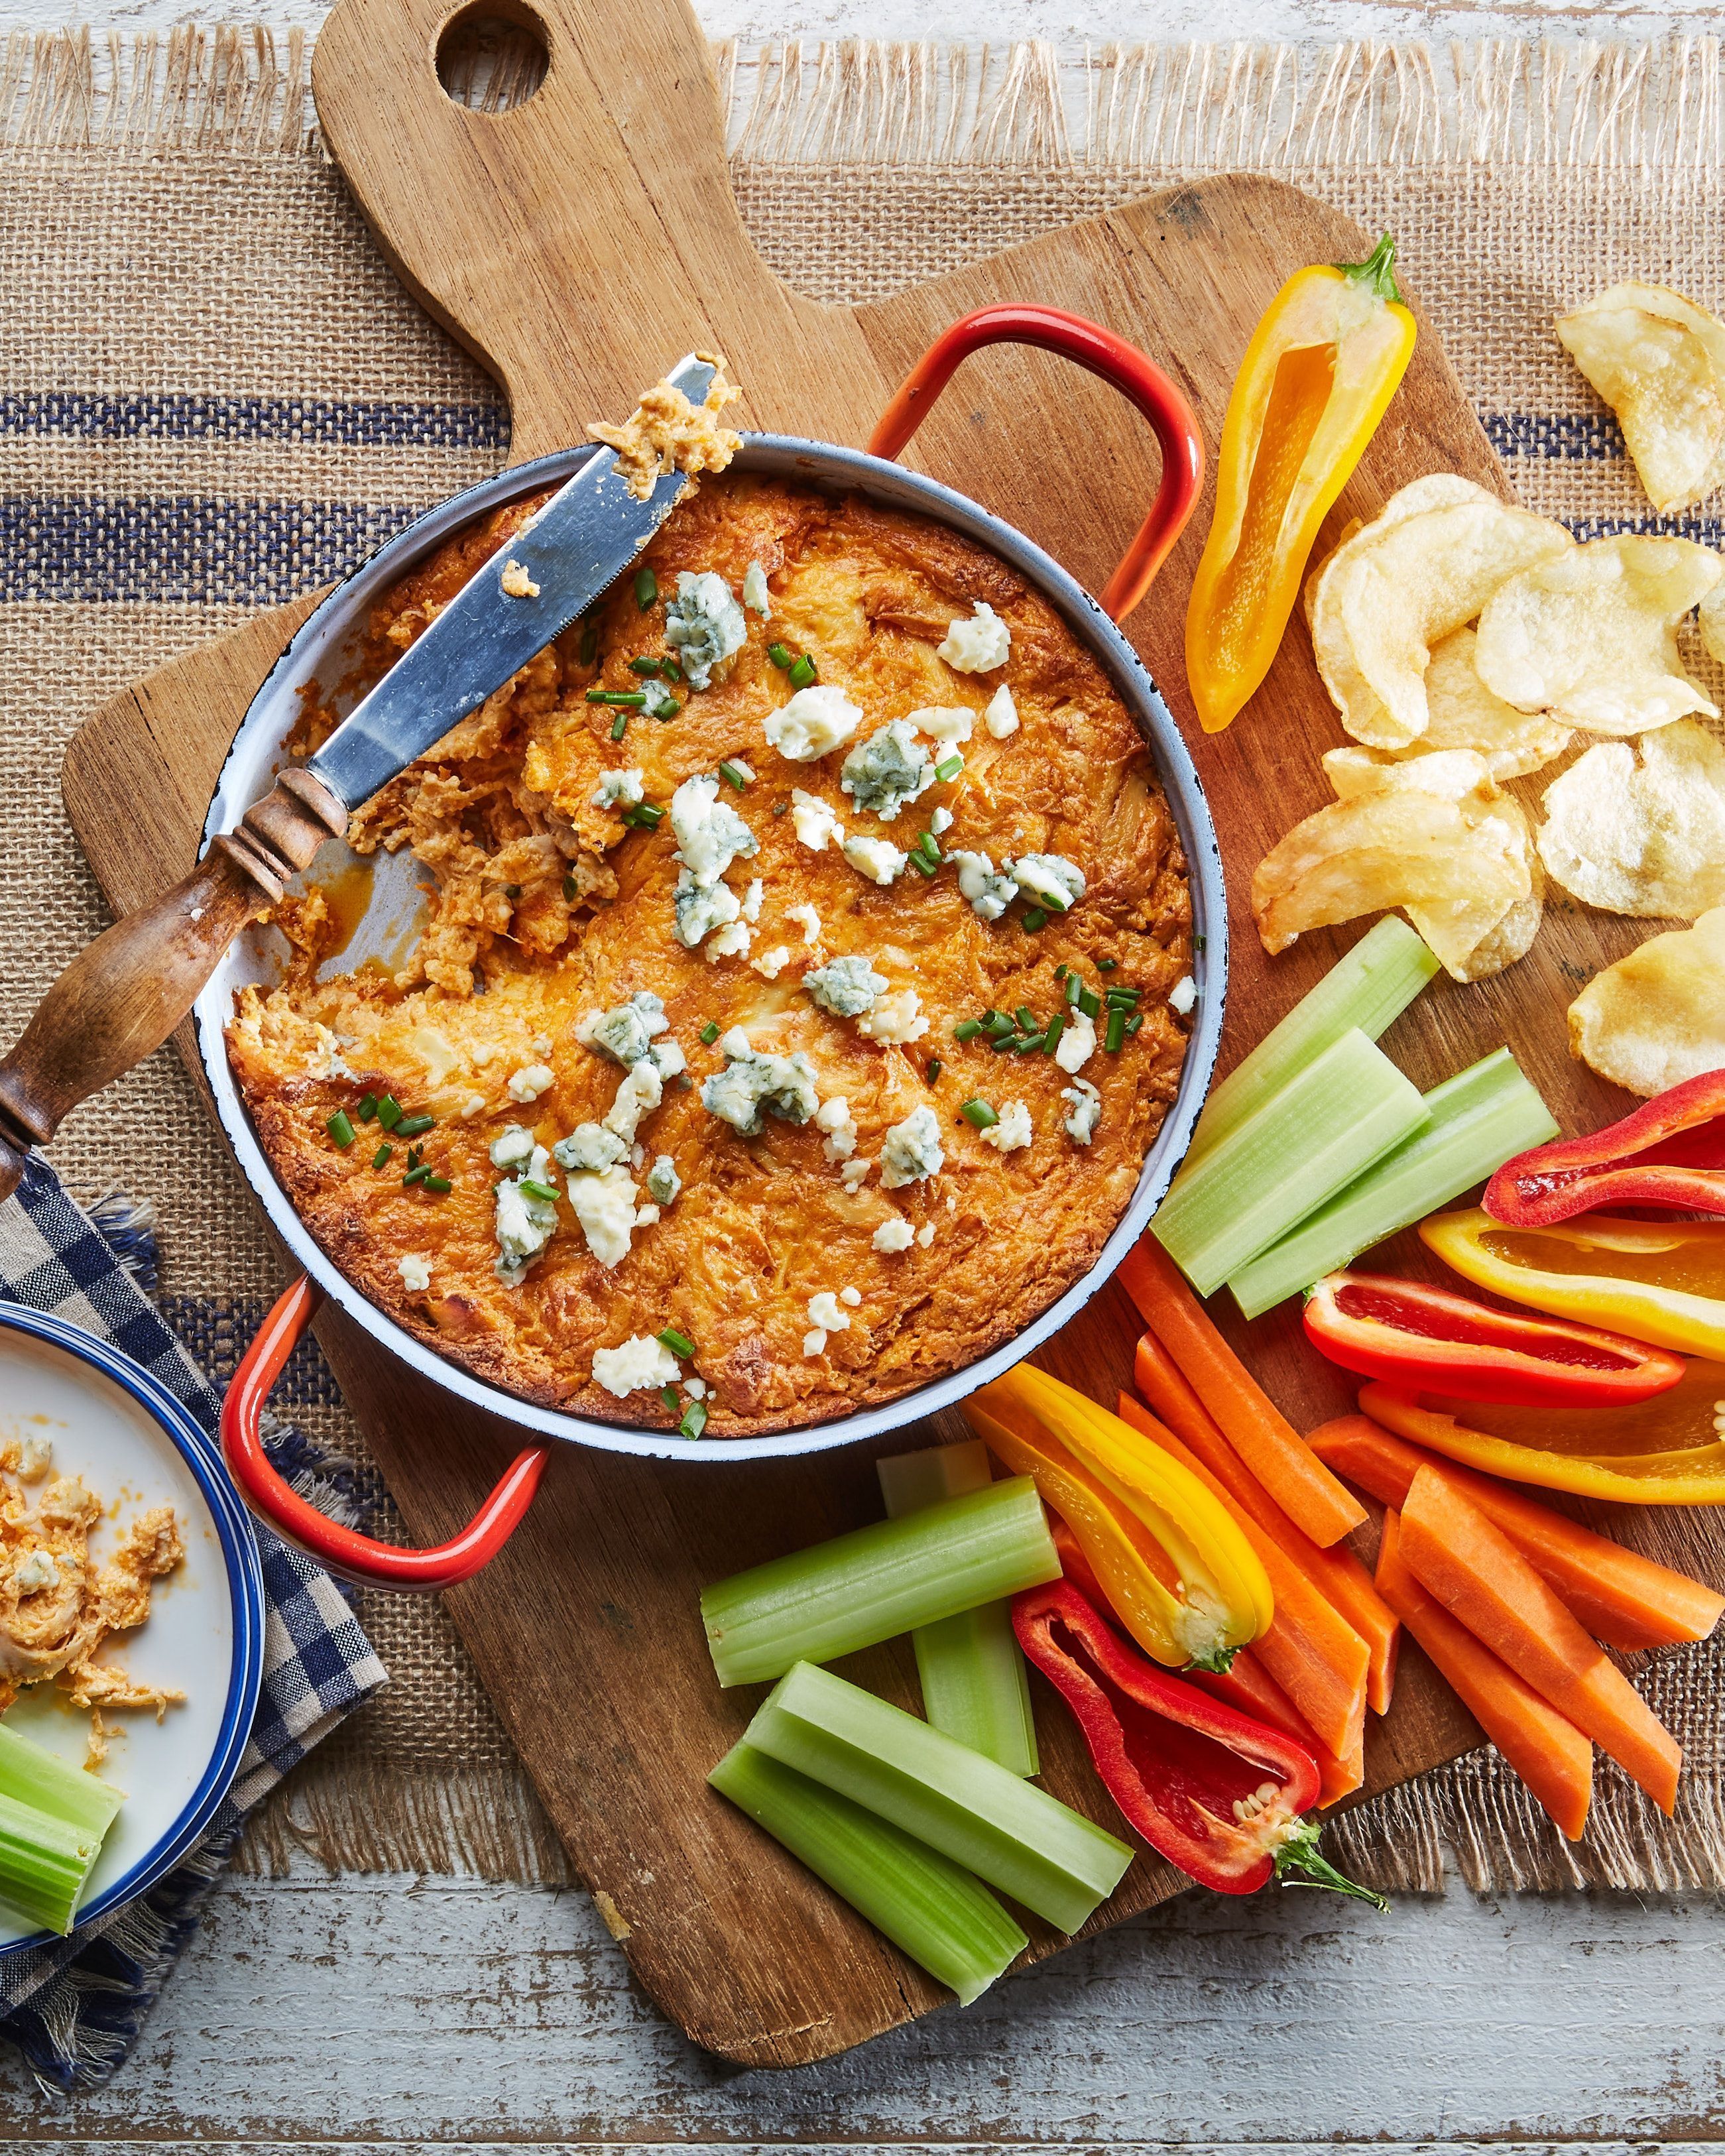 15 Best Super Bowl Dips - Easy Super Bowl Dips and Appetizers